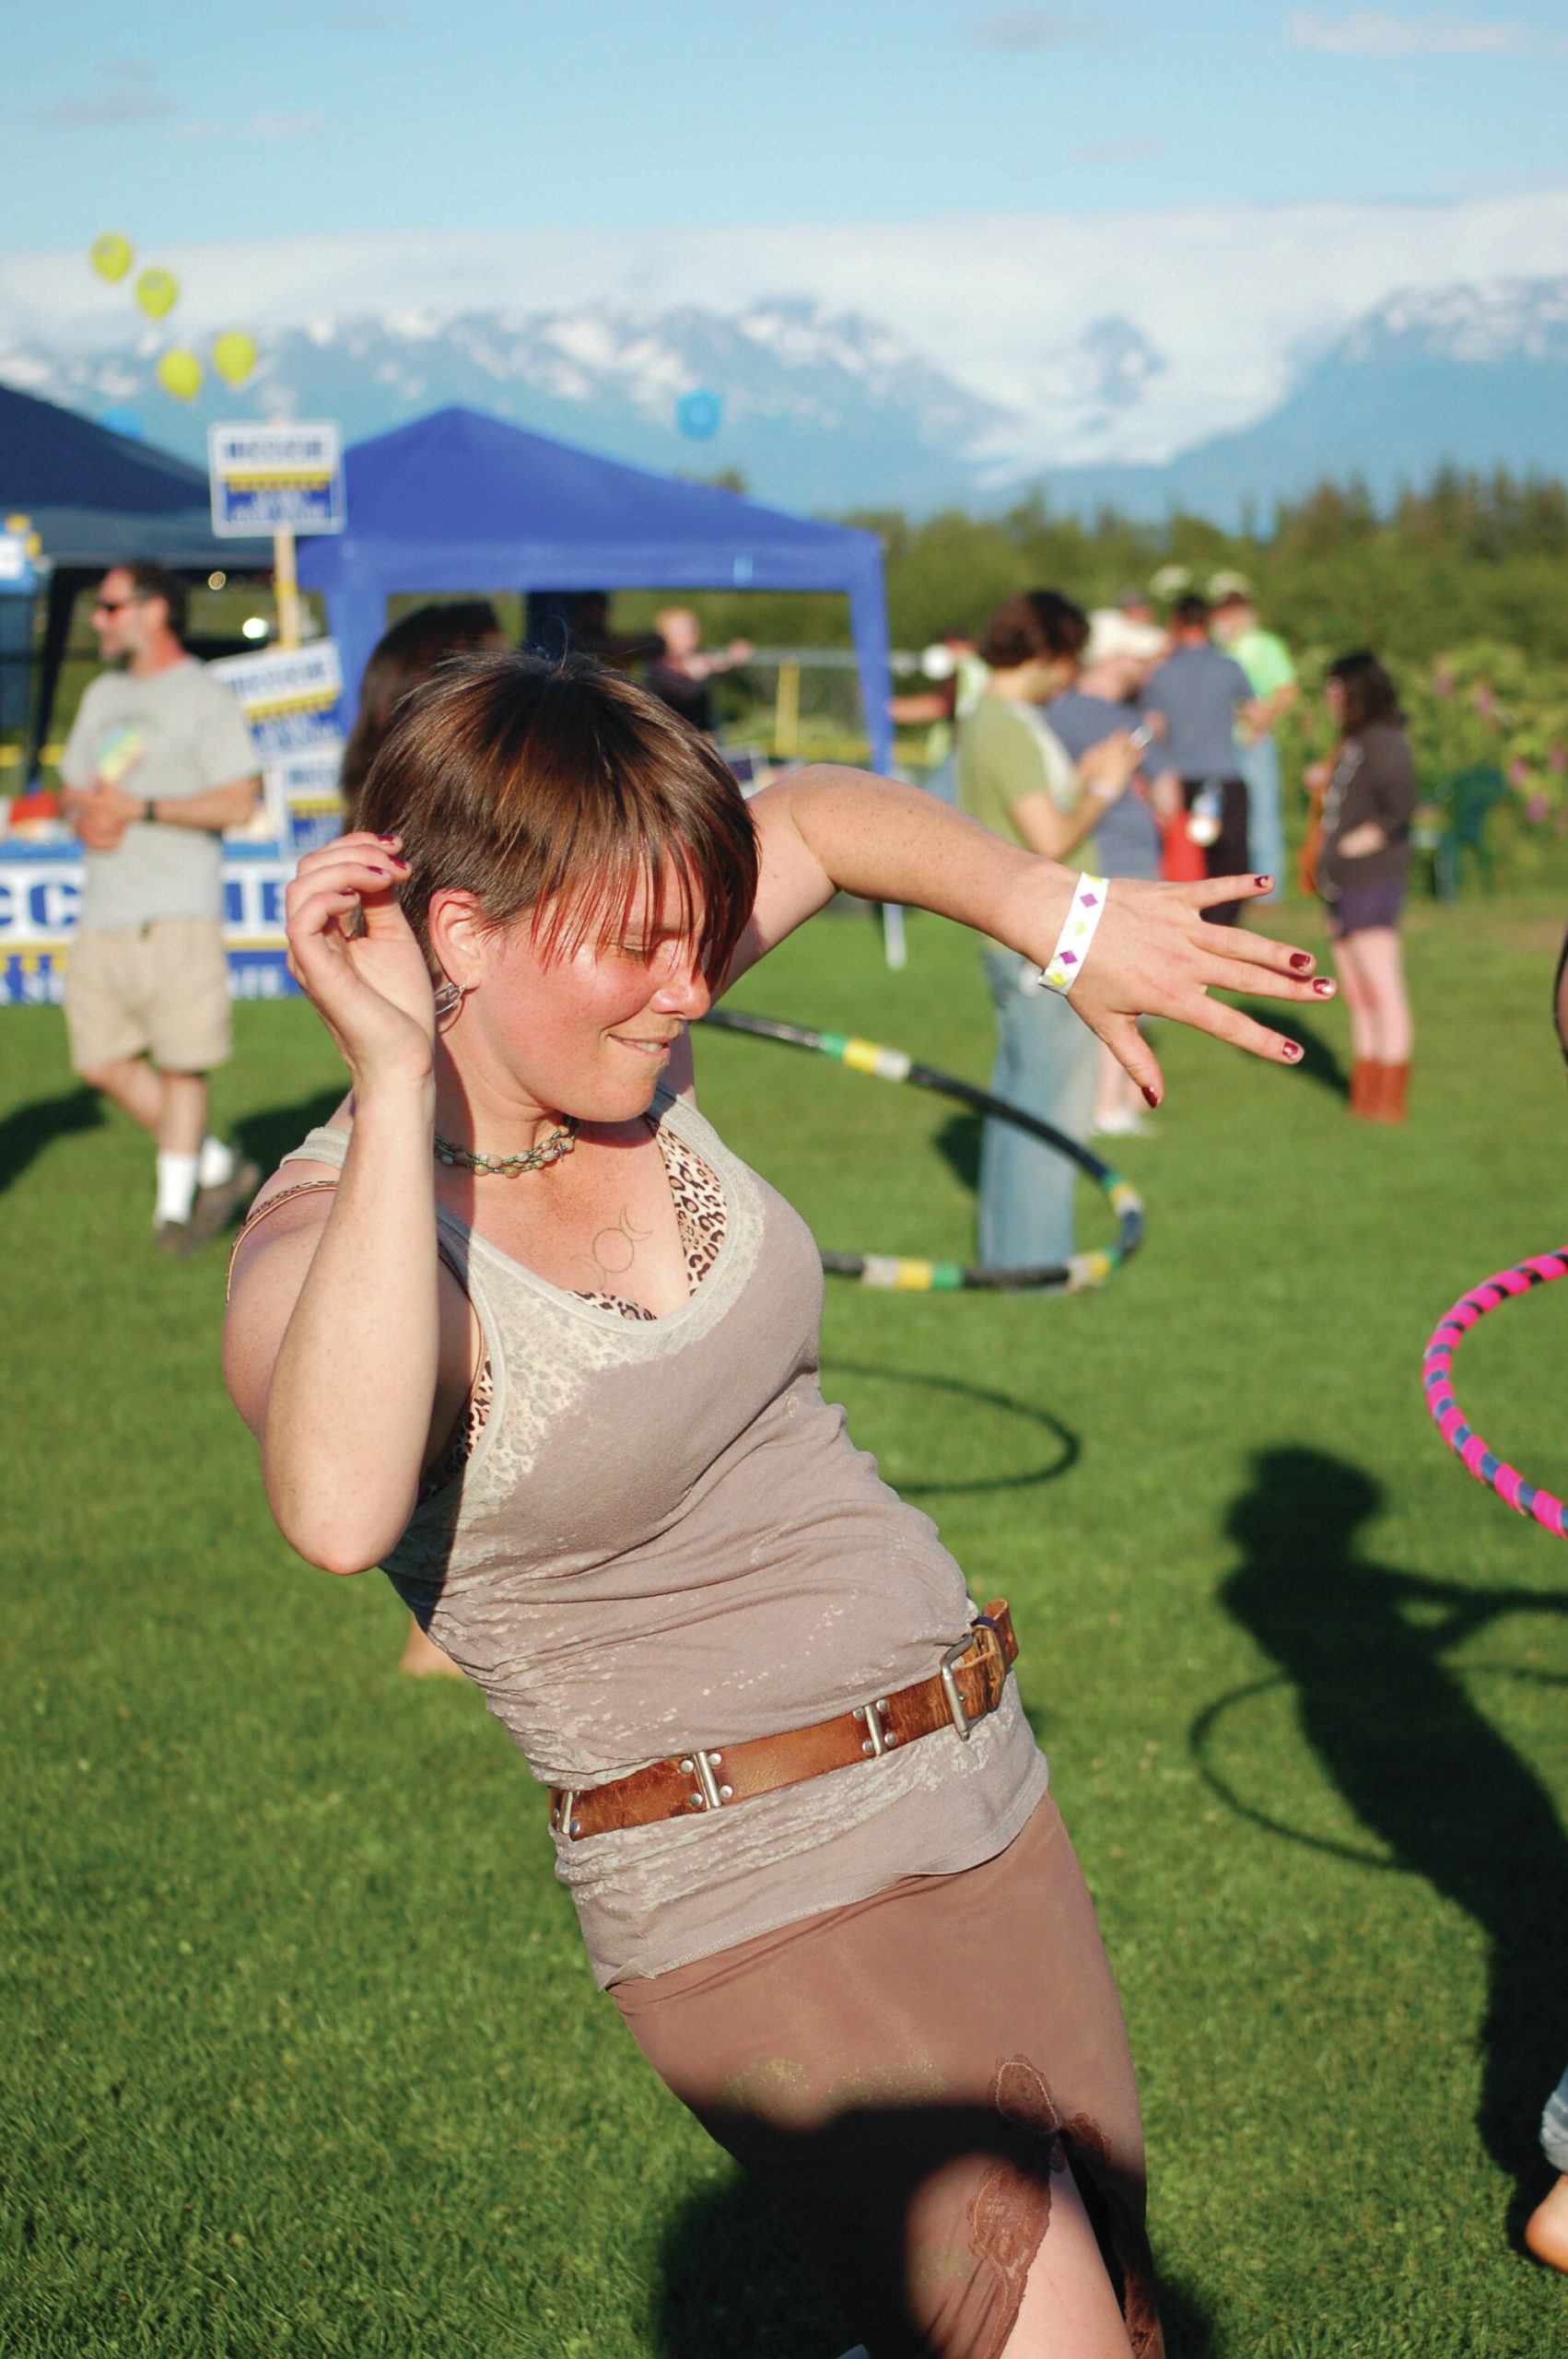 Kammi Matson hoops to music at the KBBI Concert on the Lawn n July 28, 2012, at Karen Hornaday Park in Homer, Alaska. (Photo by Michael Armstrong/Homer News)